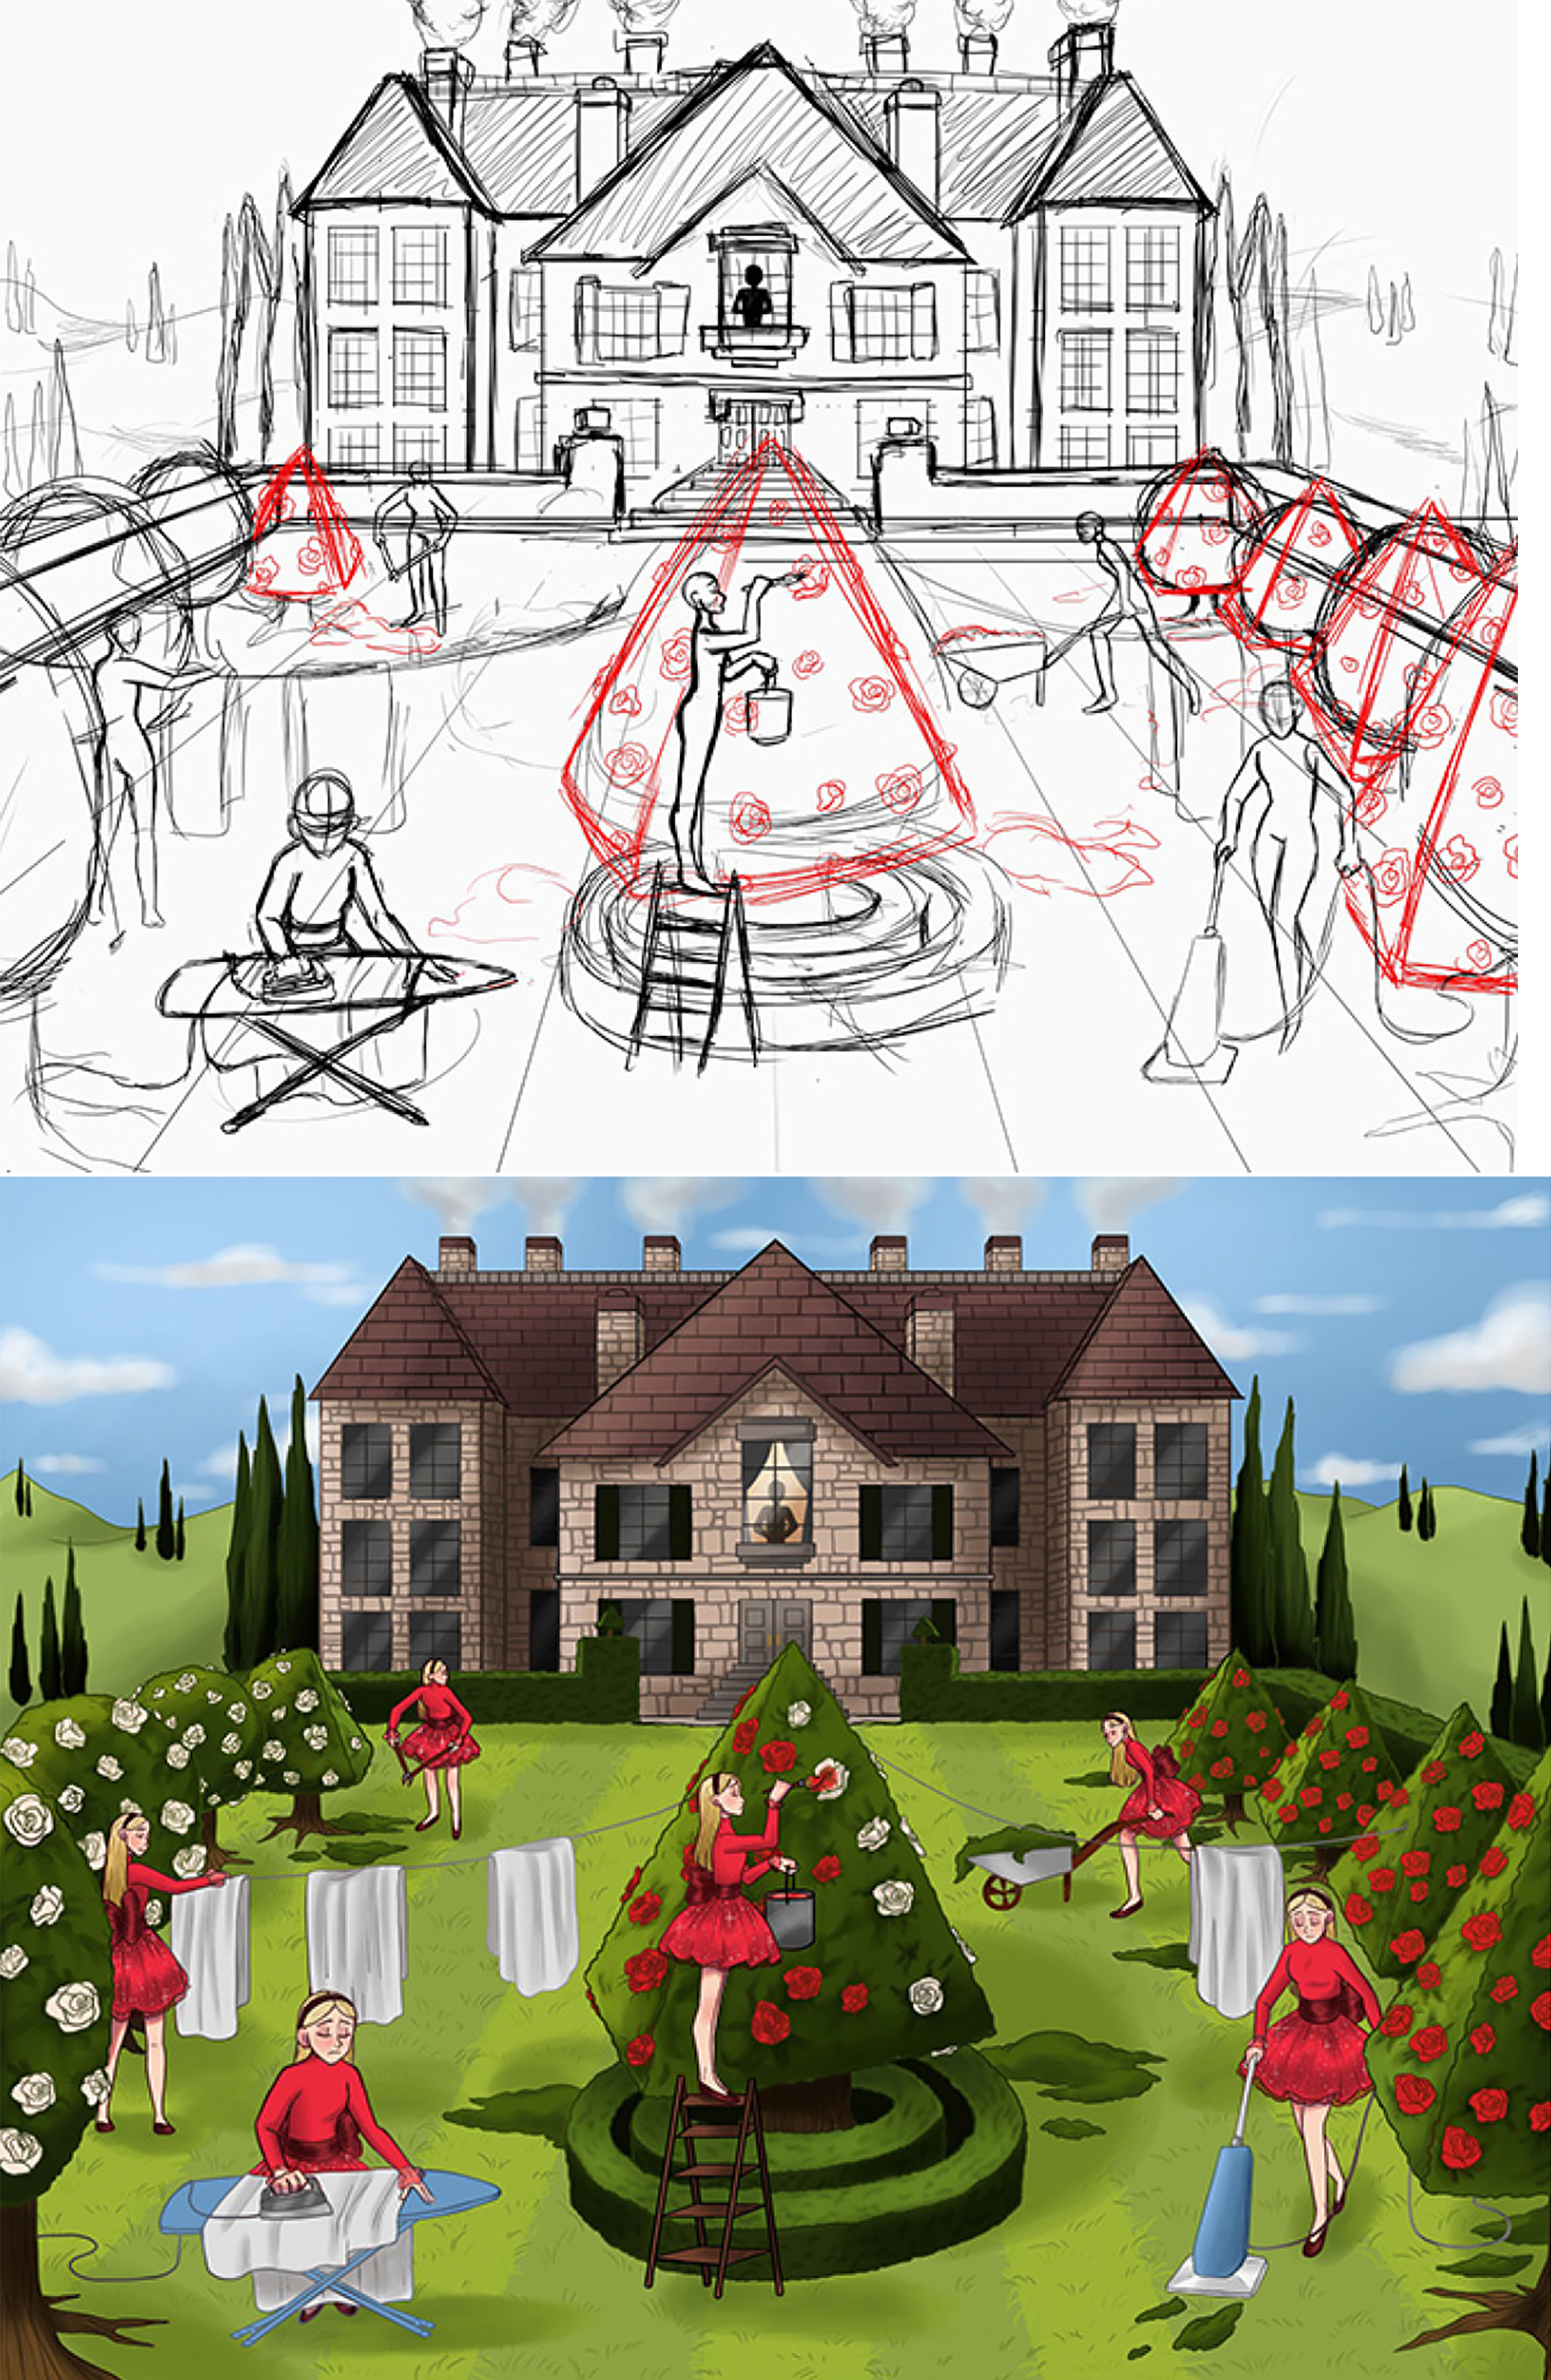 Black and white process sketch of an illustration of a mansion and its large front yard, above the completed work